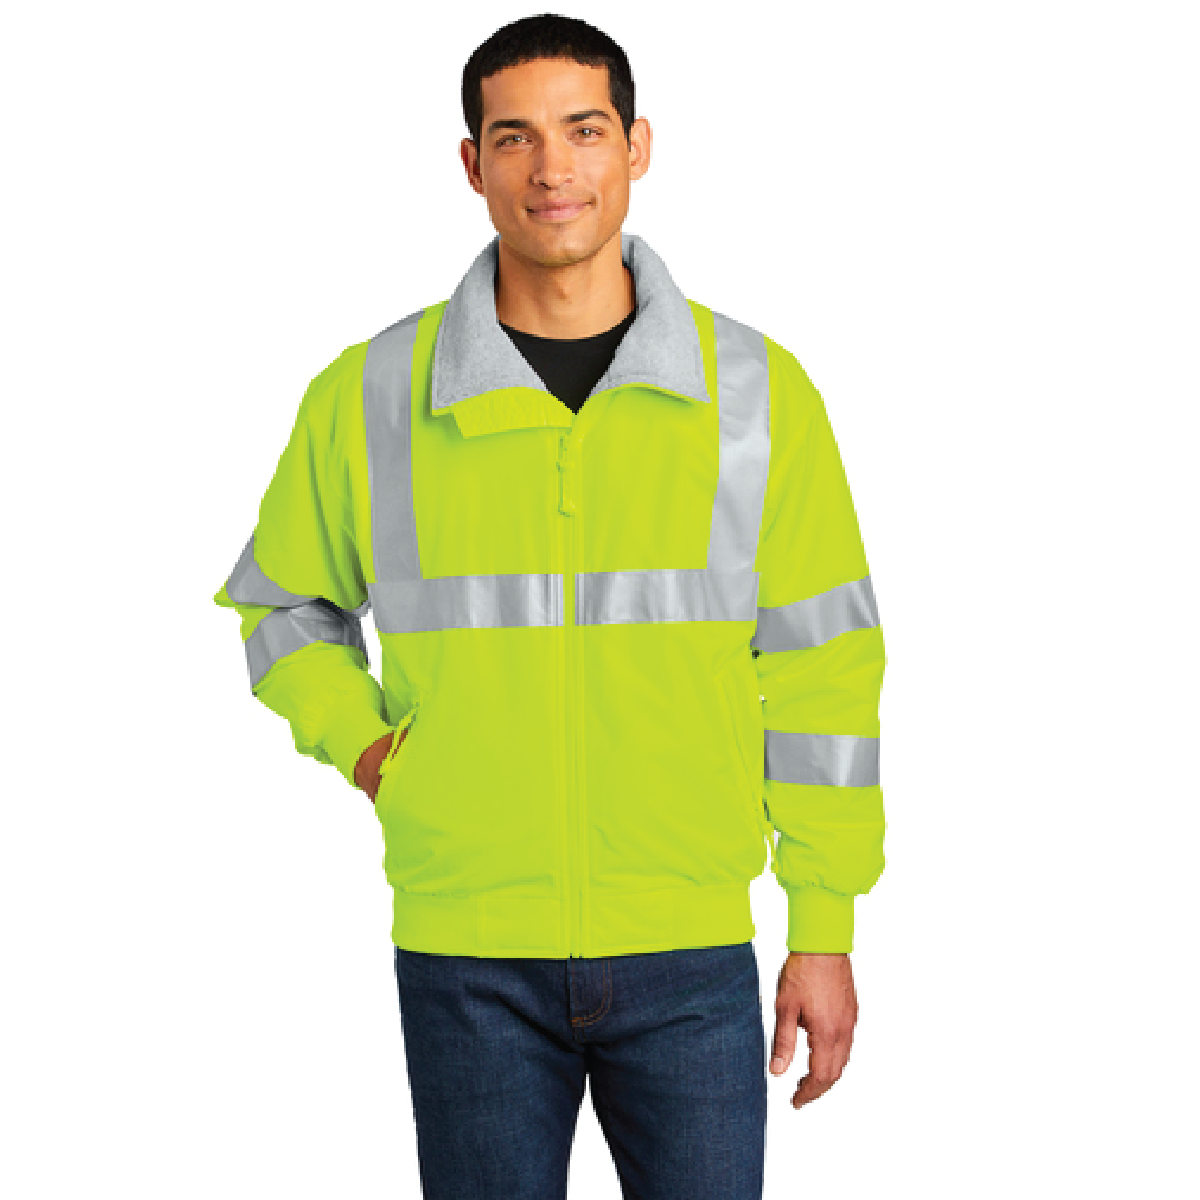 Loparex Enhanced Visibility Challenger Jacket with Reflective Taping